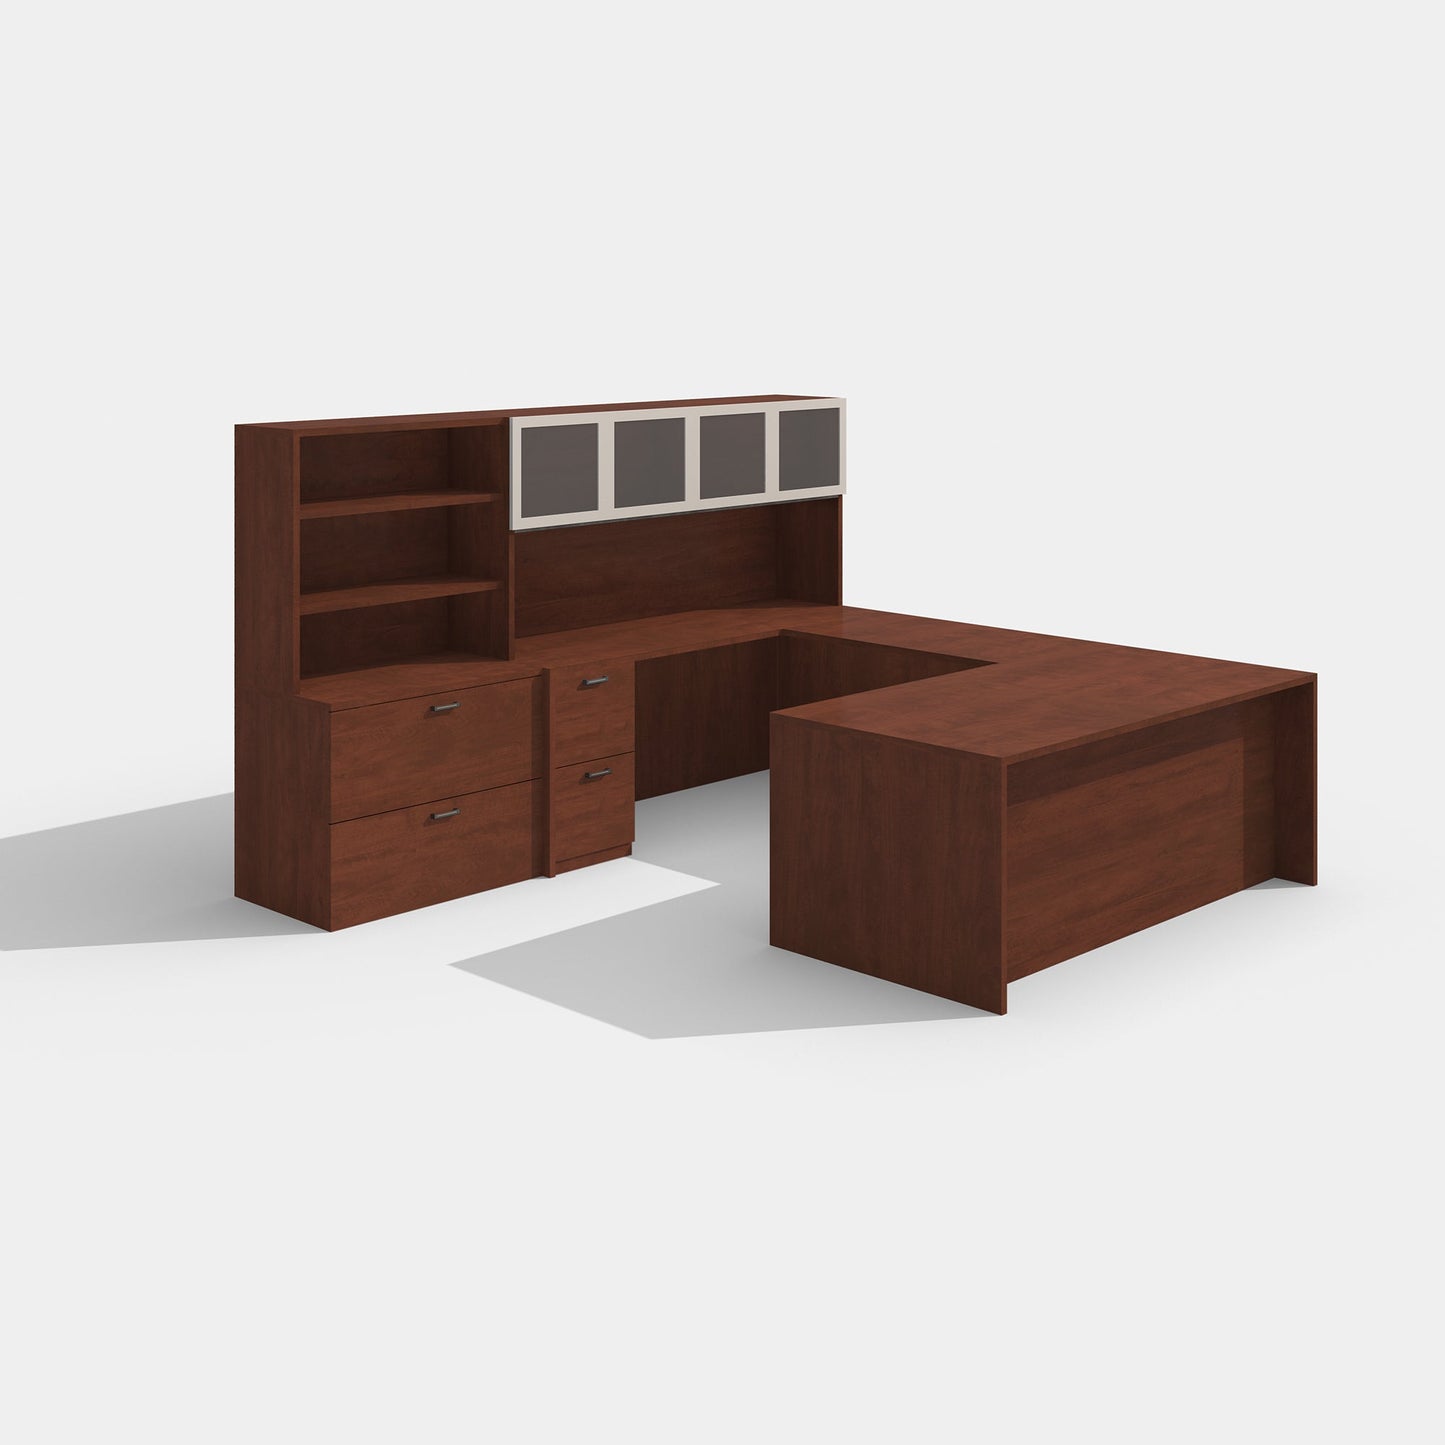 Load image into Gallery viewer, Amber U Shaped Executive Office Desk Package by Cherryman Industries - Wholesale Office Furniture
